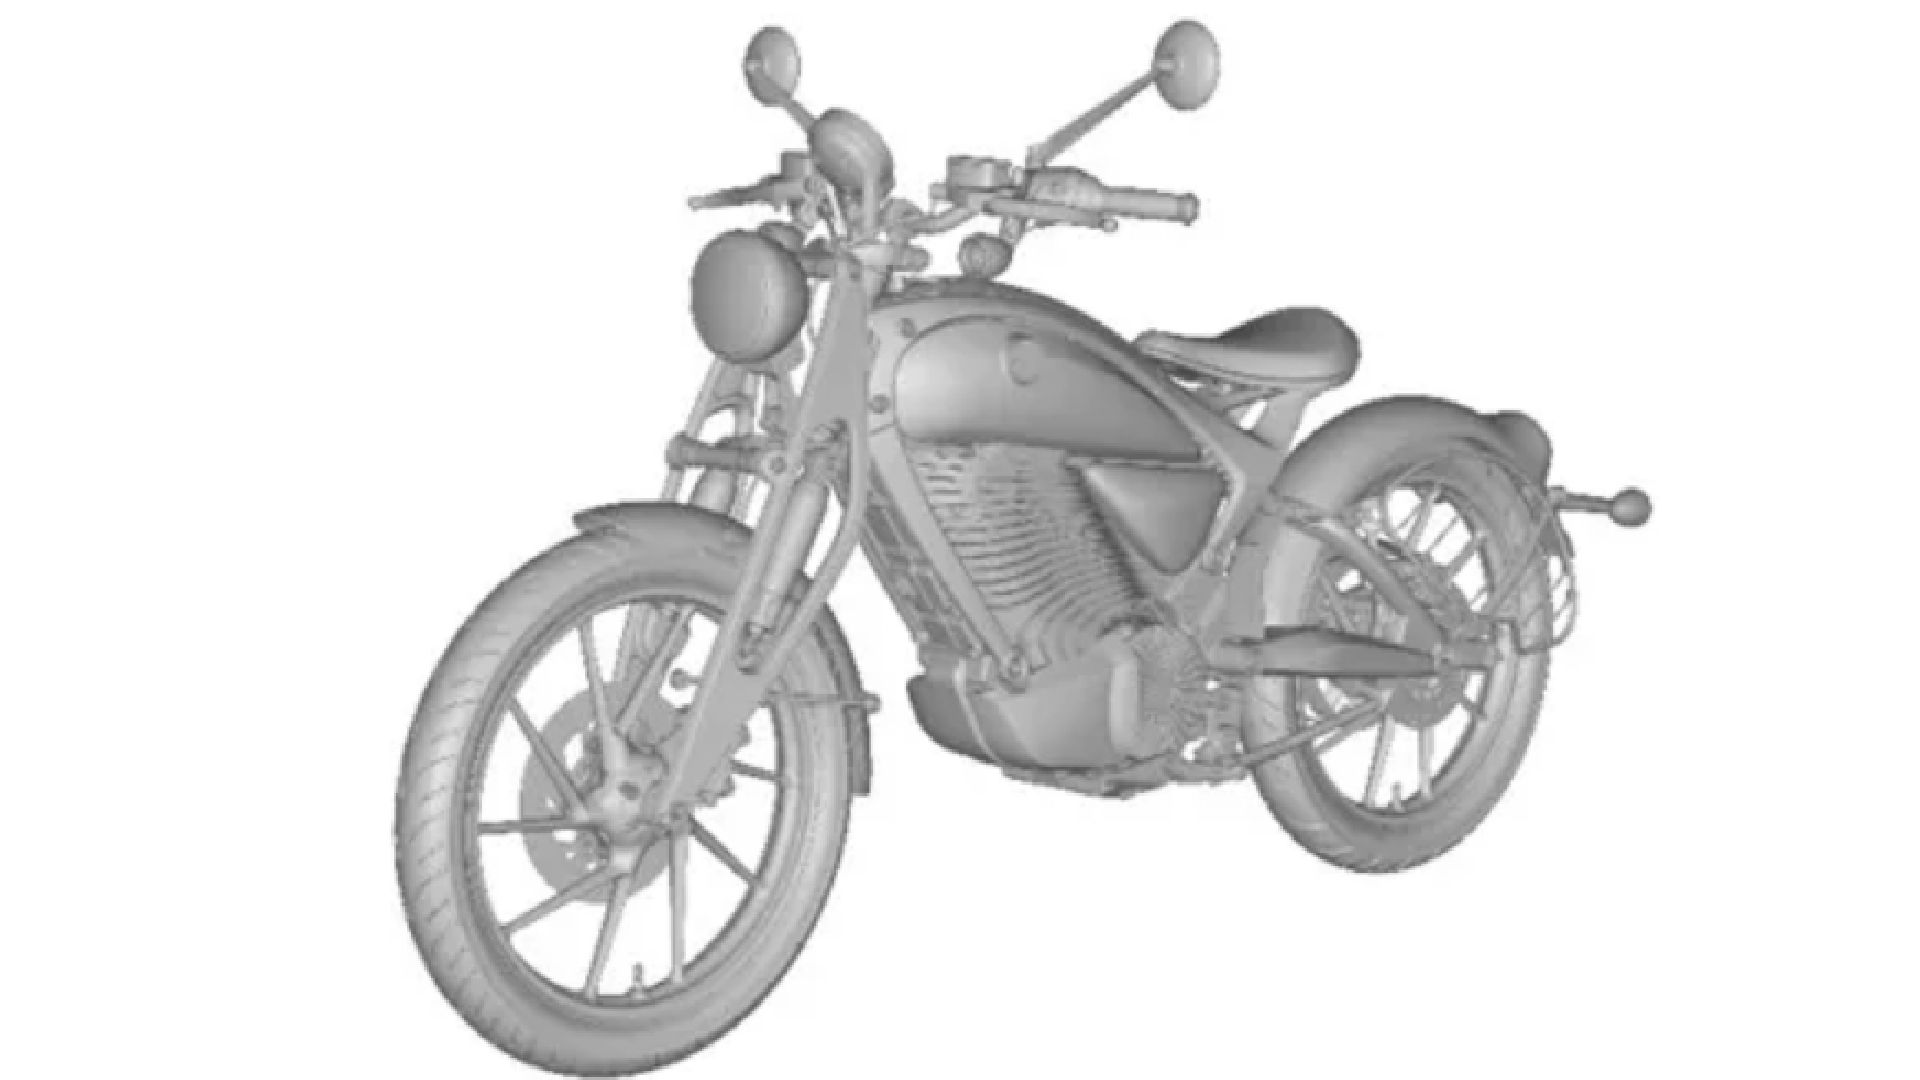 Royal Enfield electric bike design patent leaked